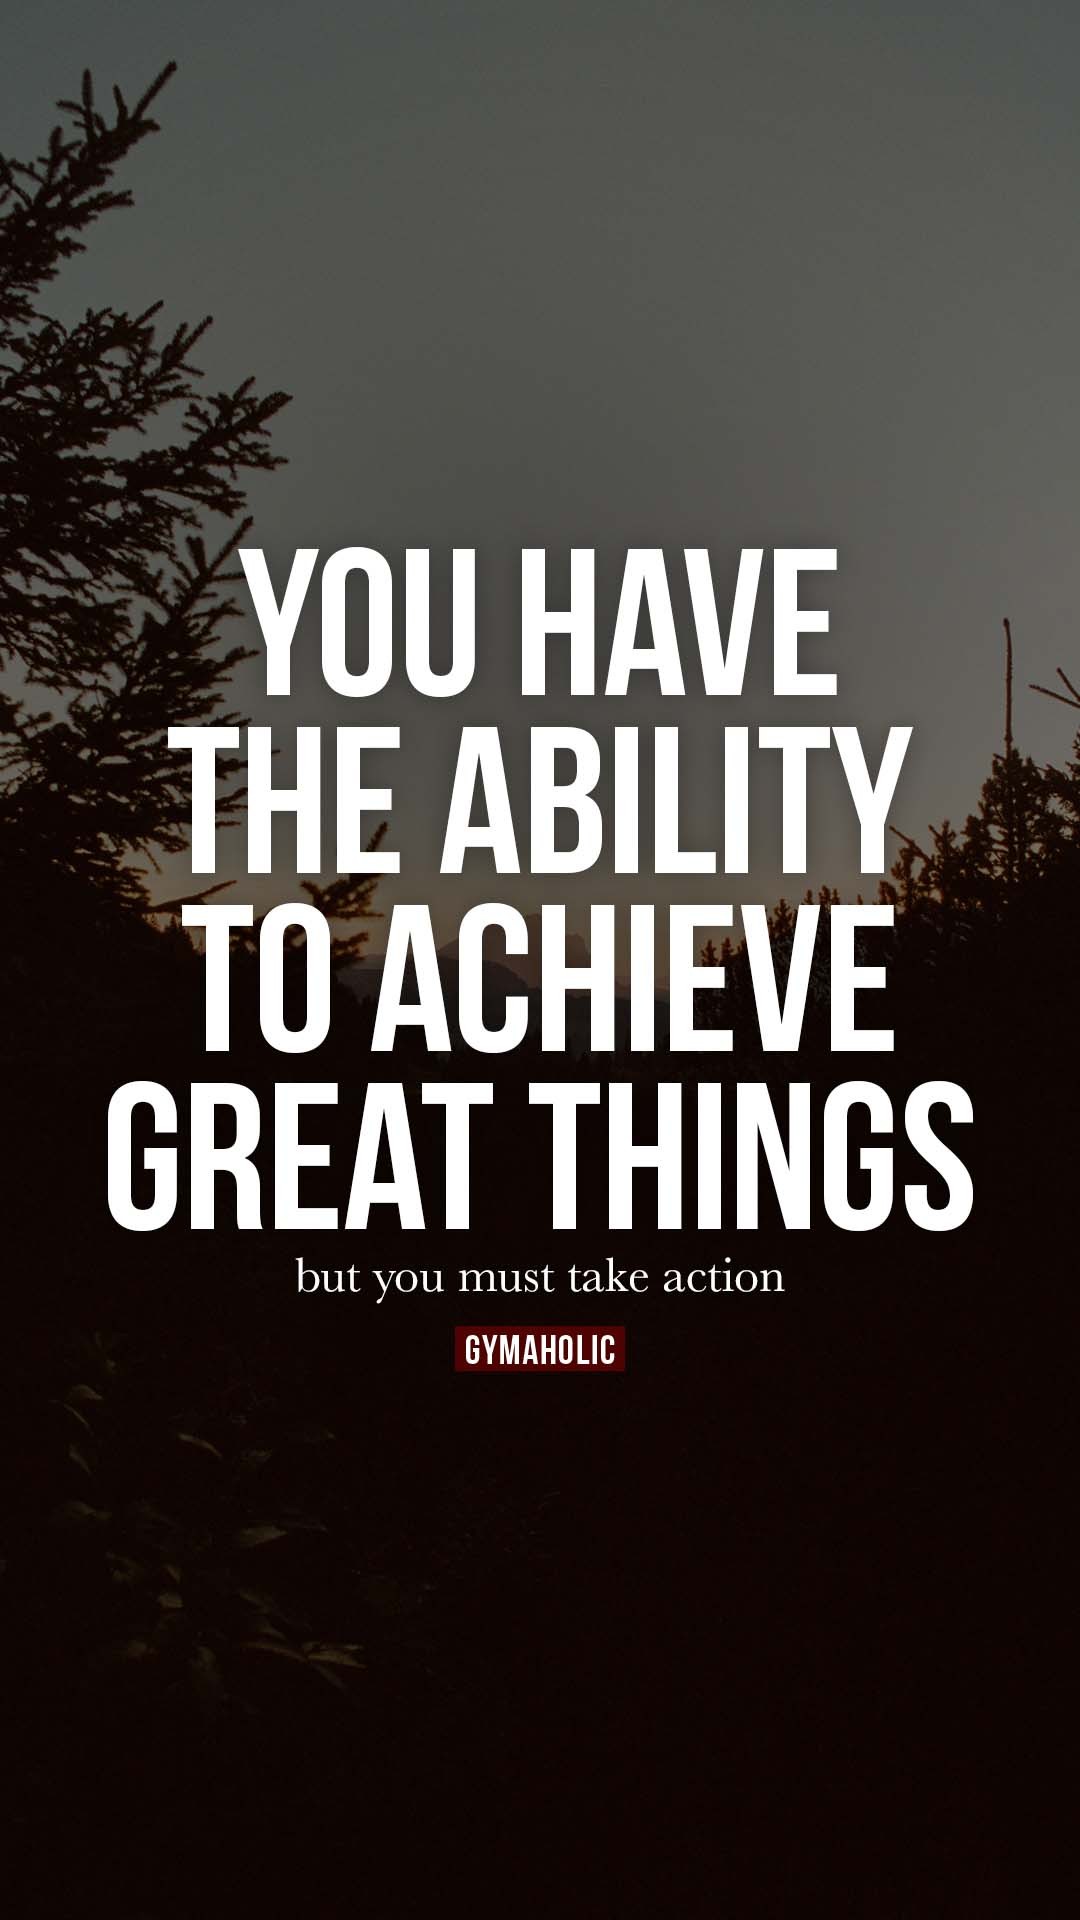 You have the ability to achieve great things